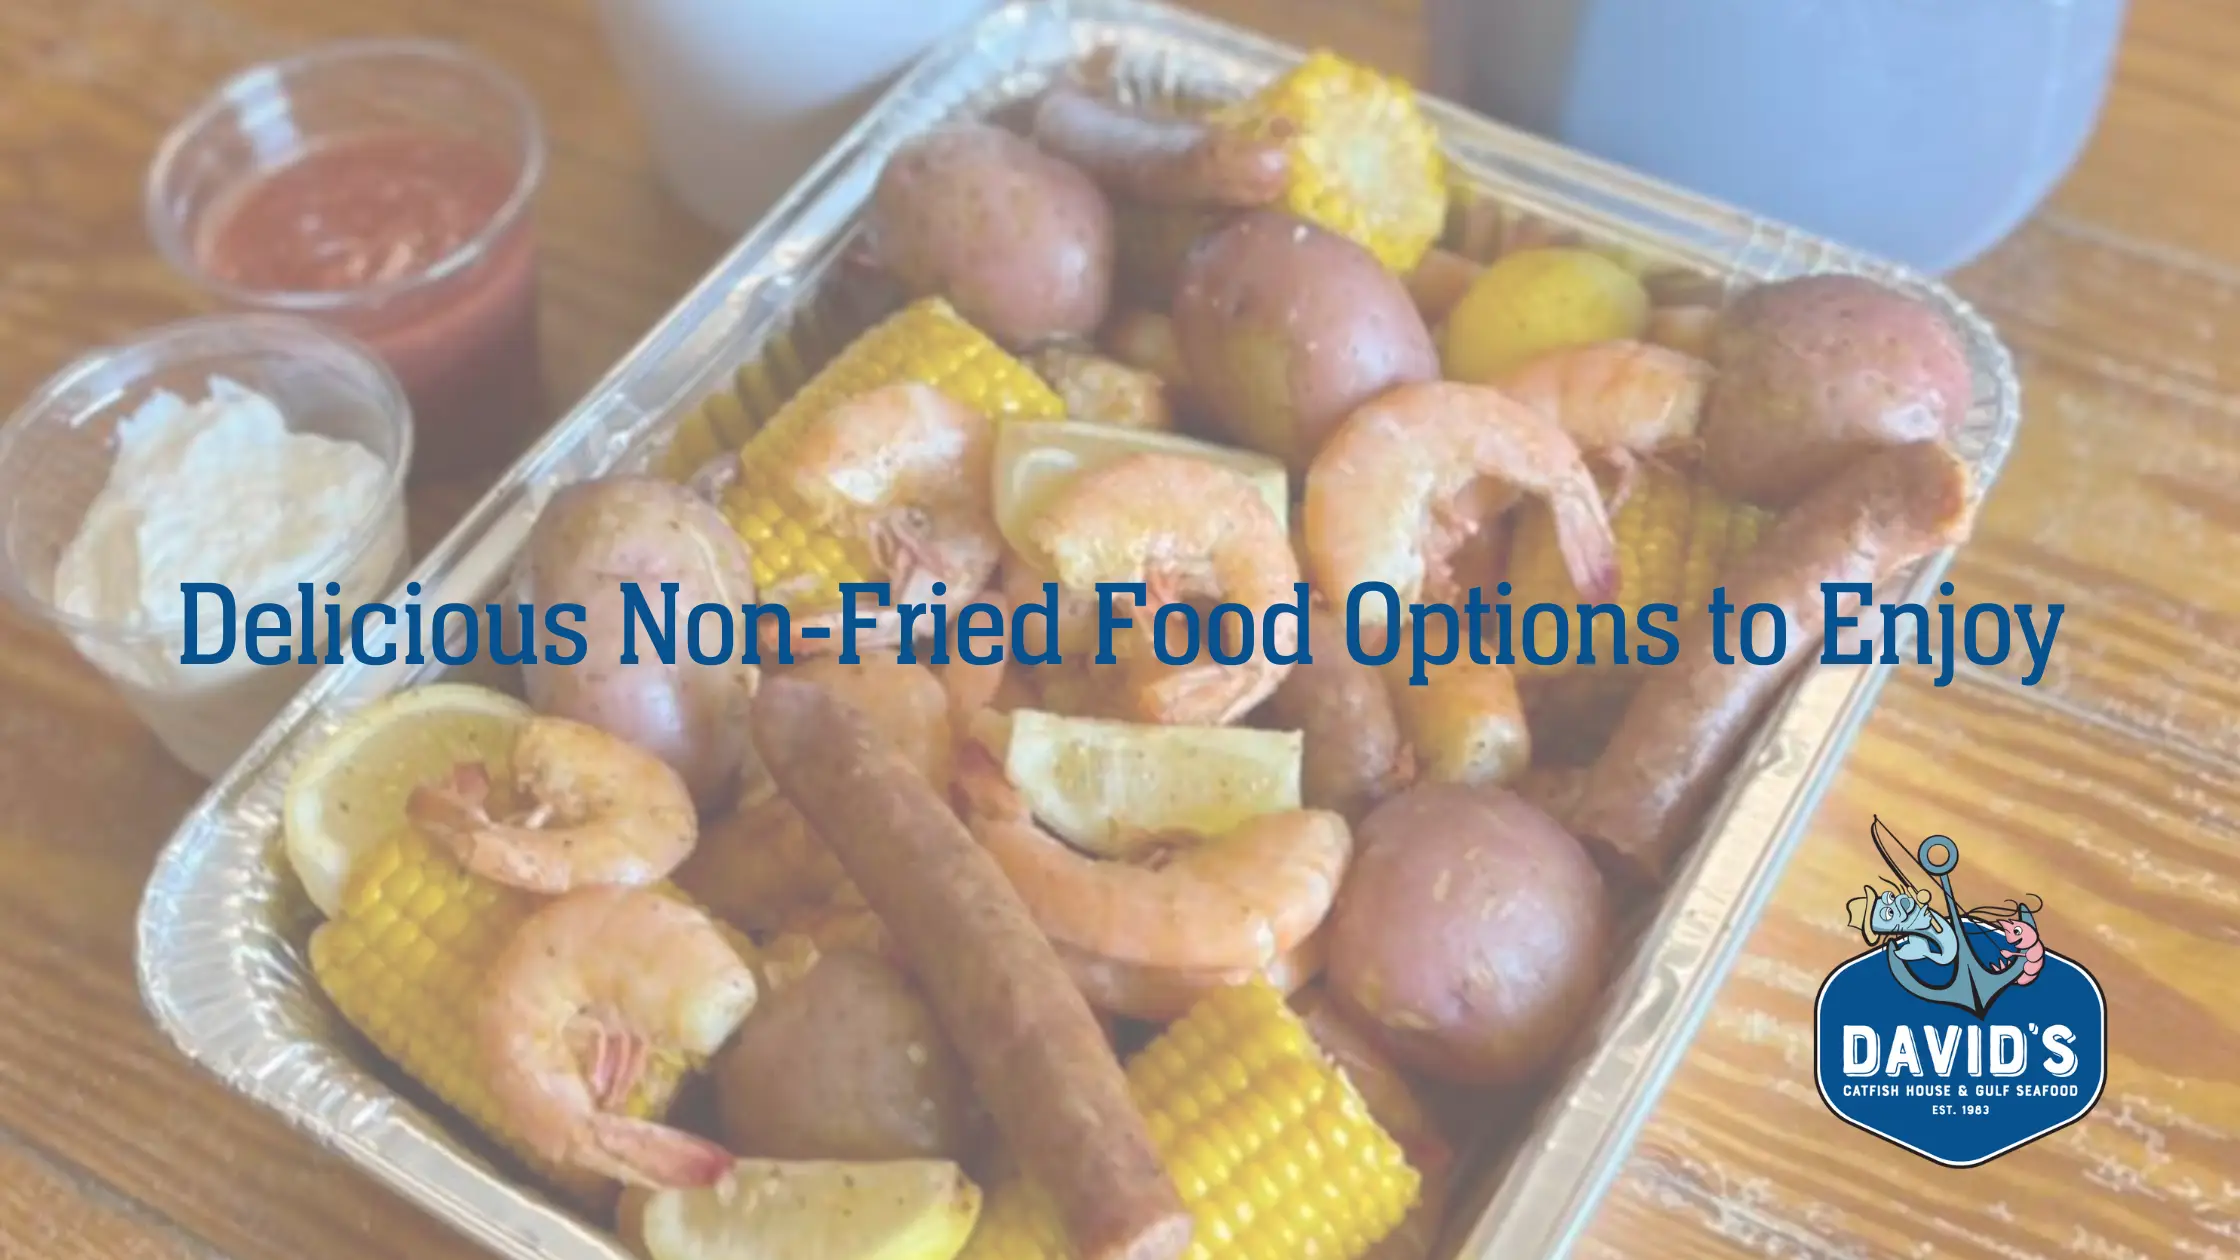 Delicious Non-Fried Food Options to Enjoy